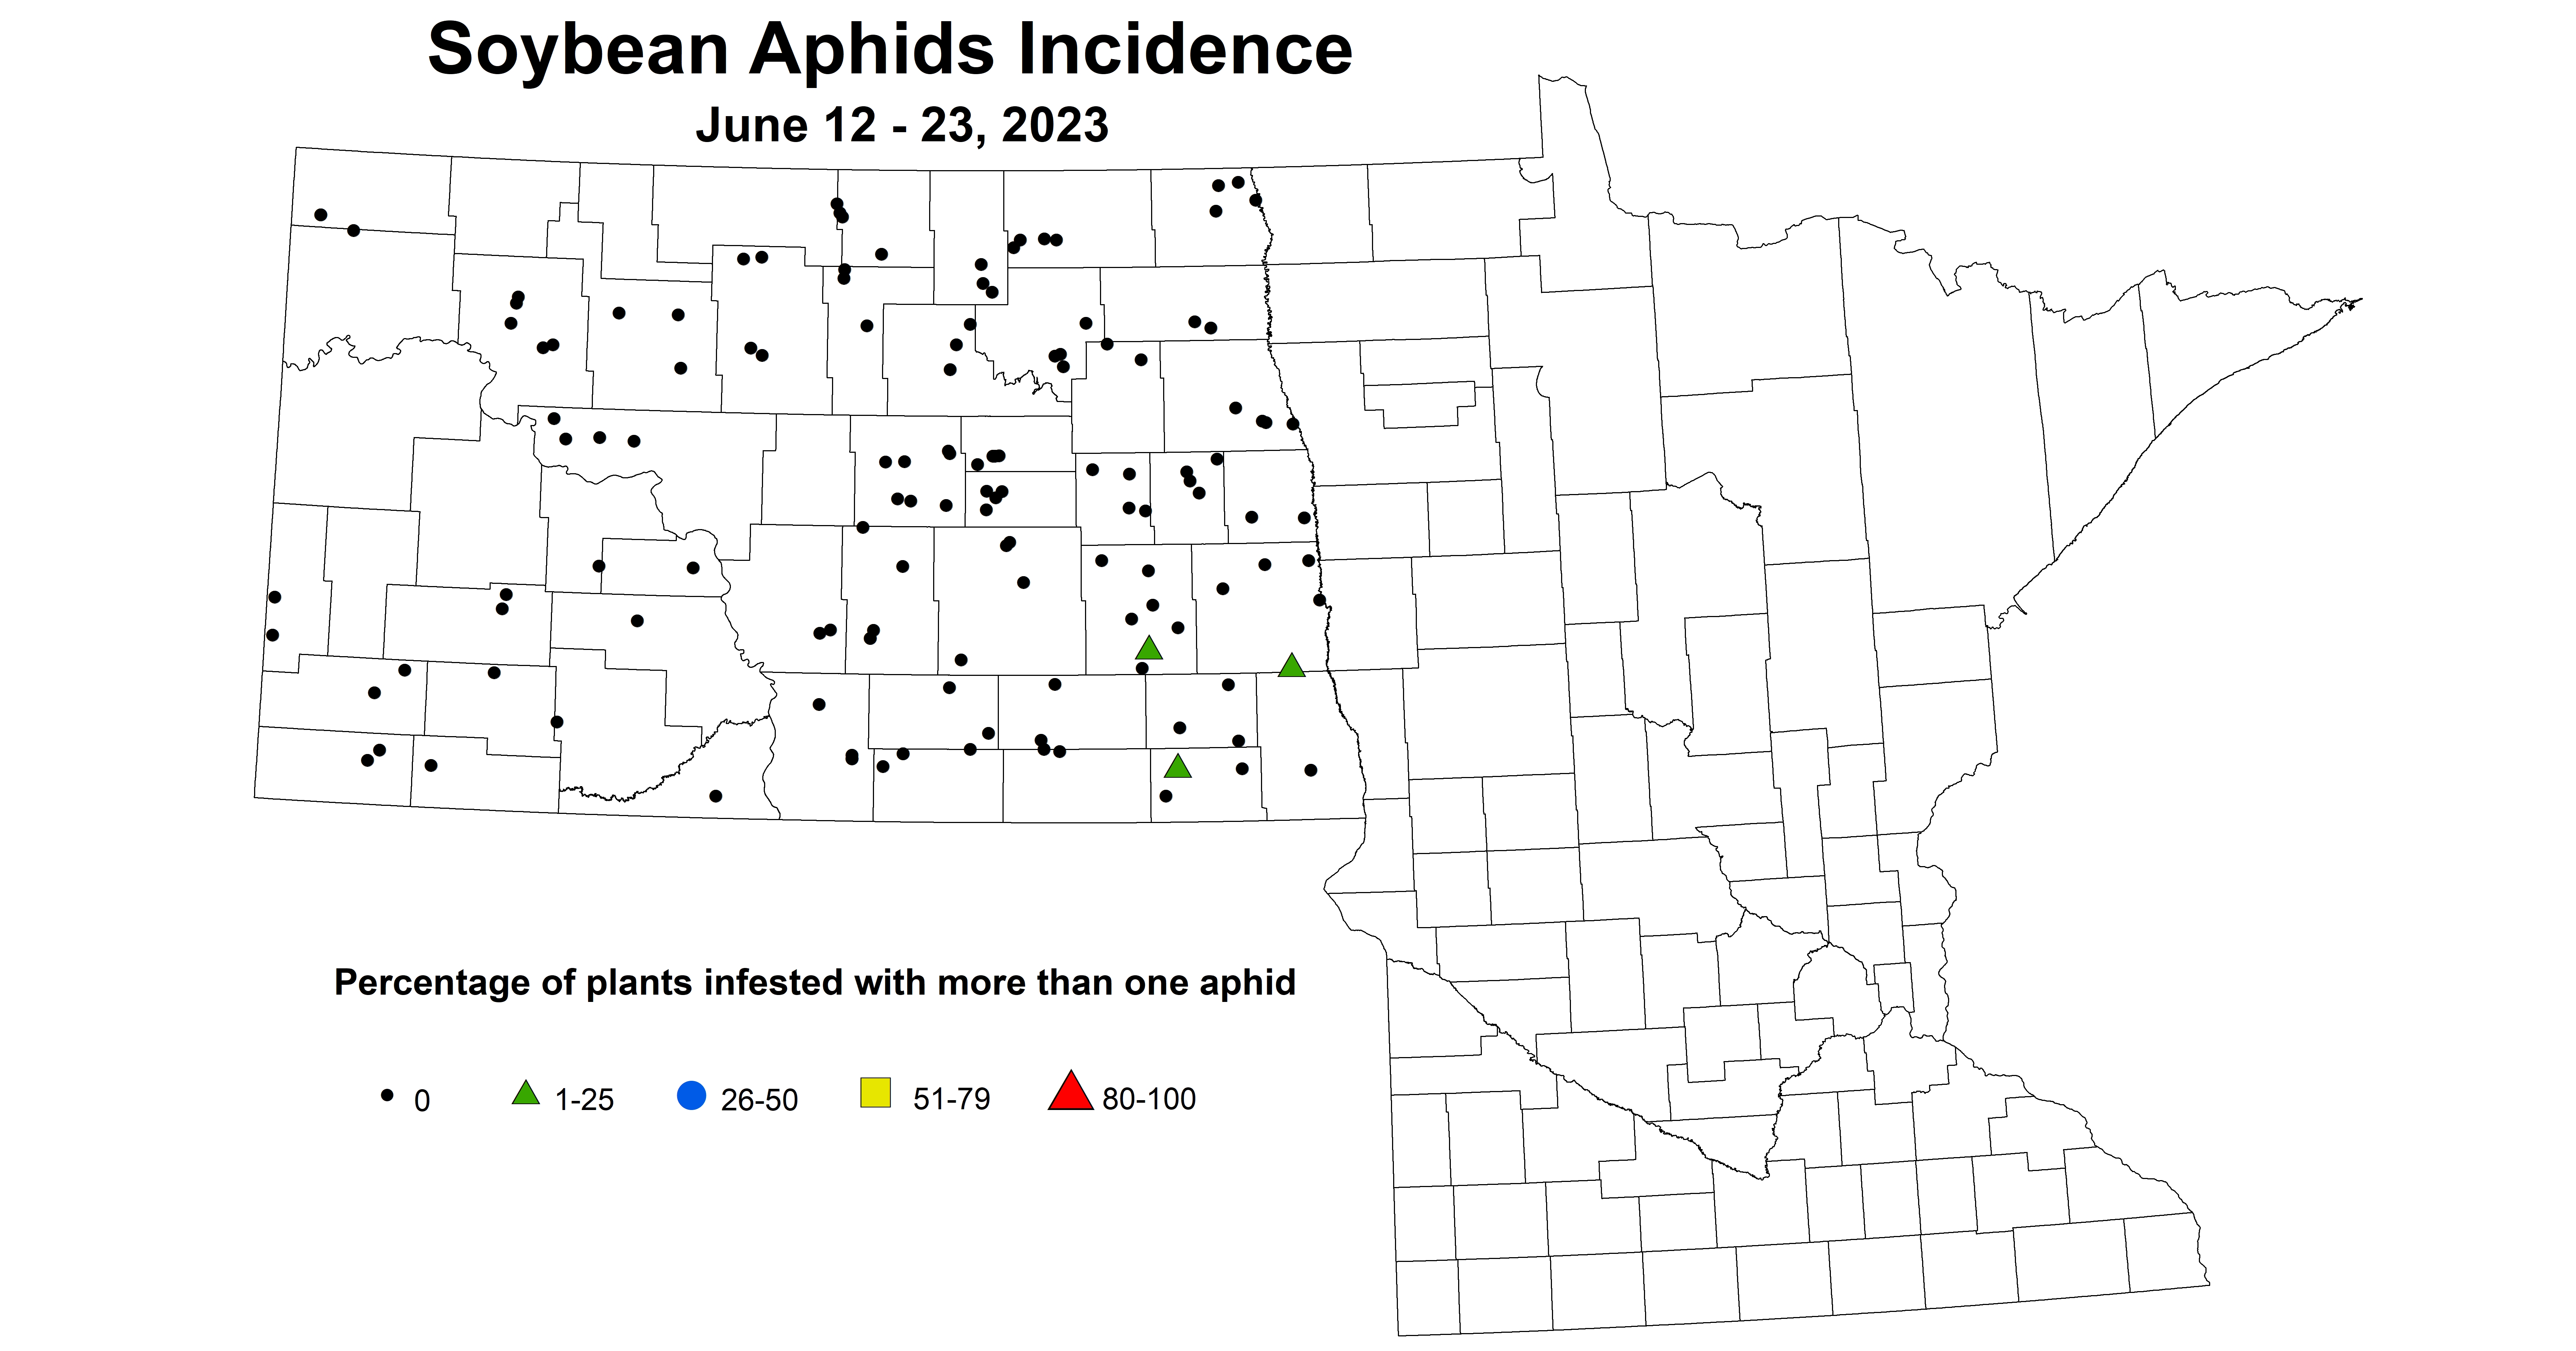 soybean aphids incidence June 12-23 2023 updated